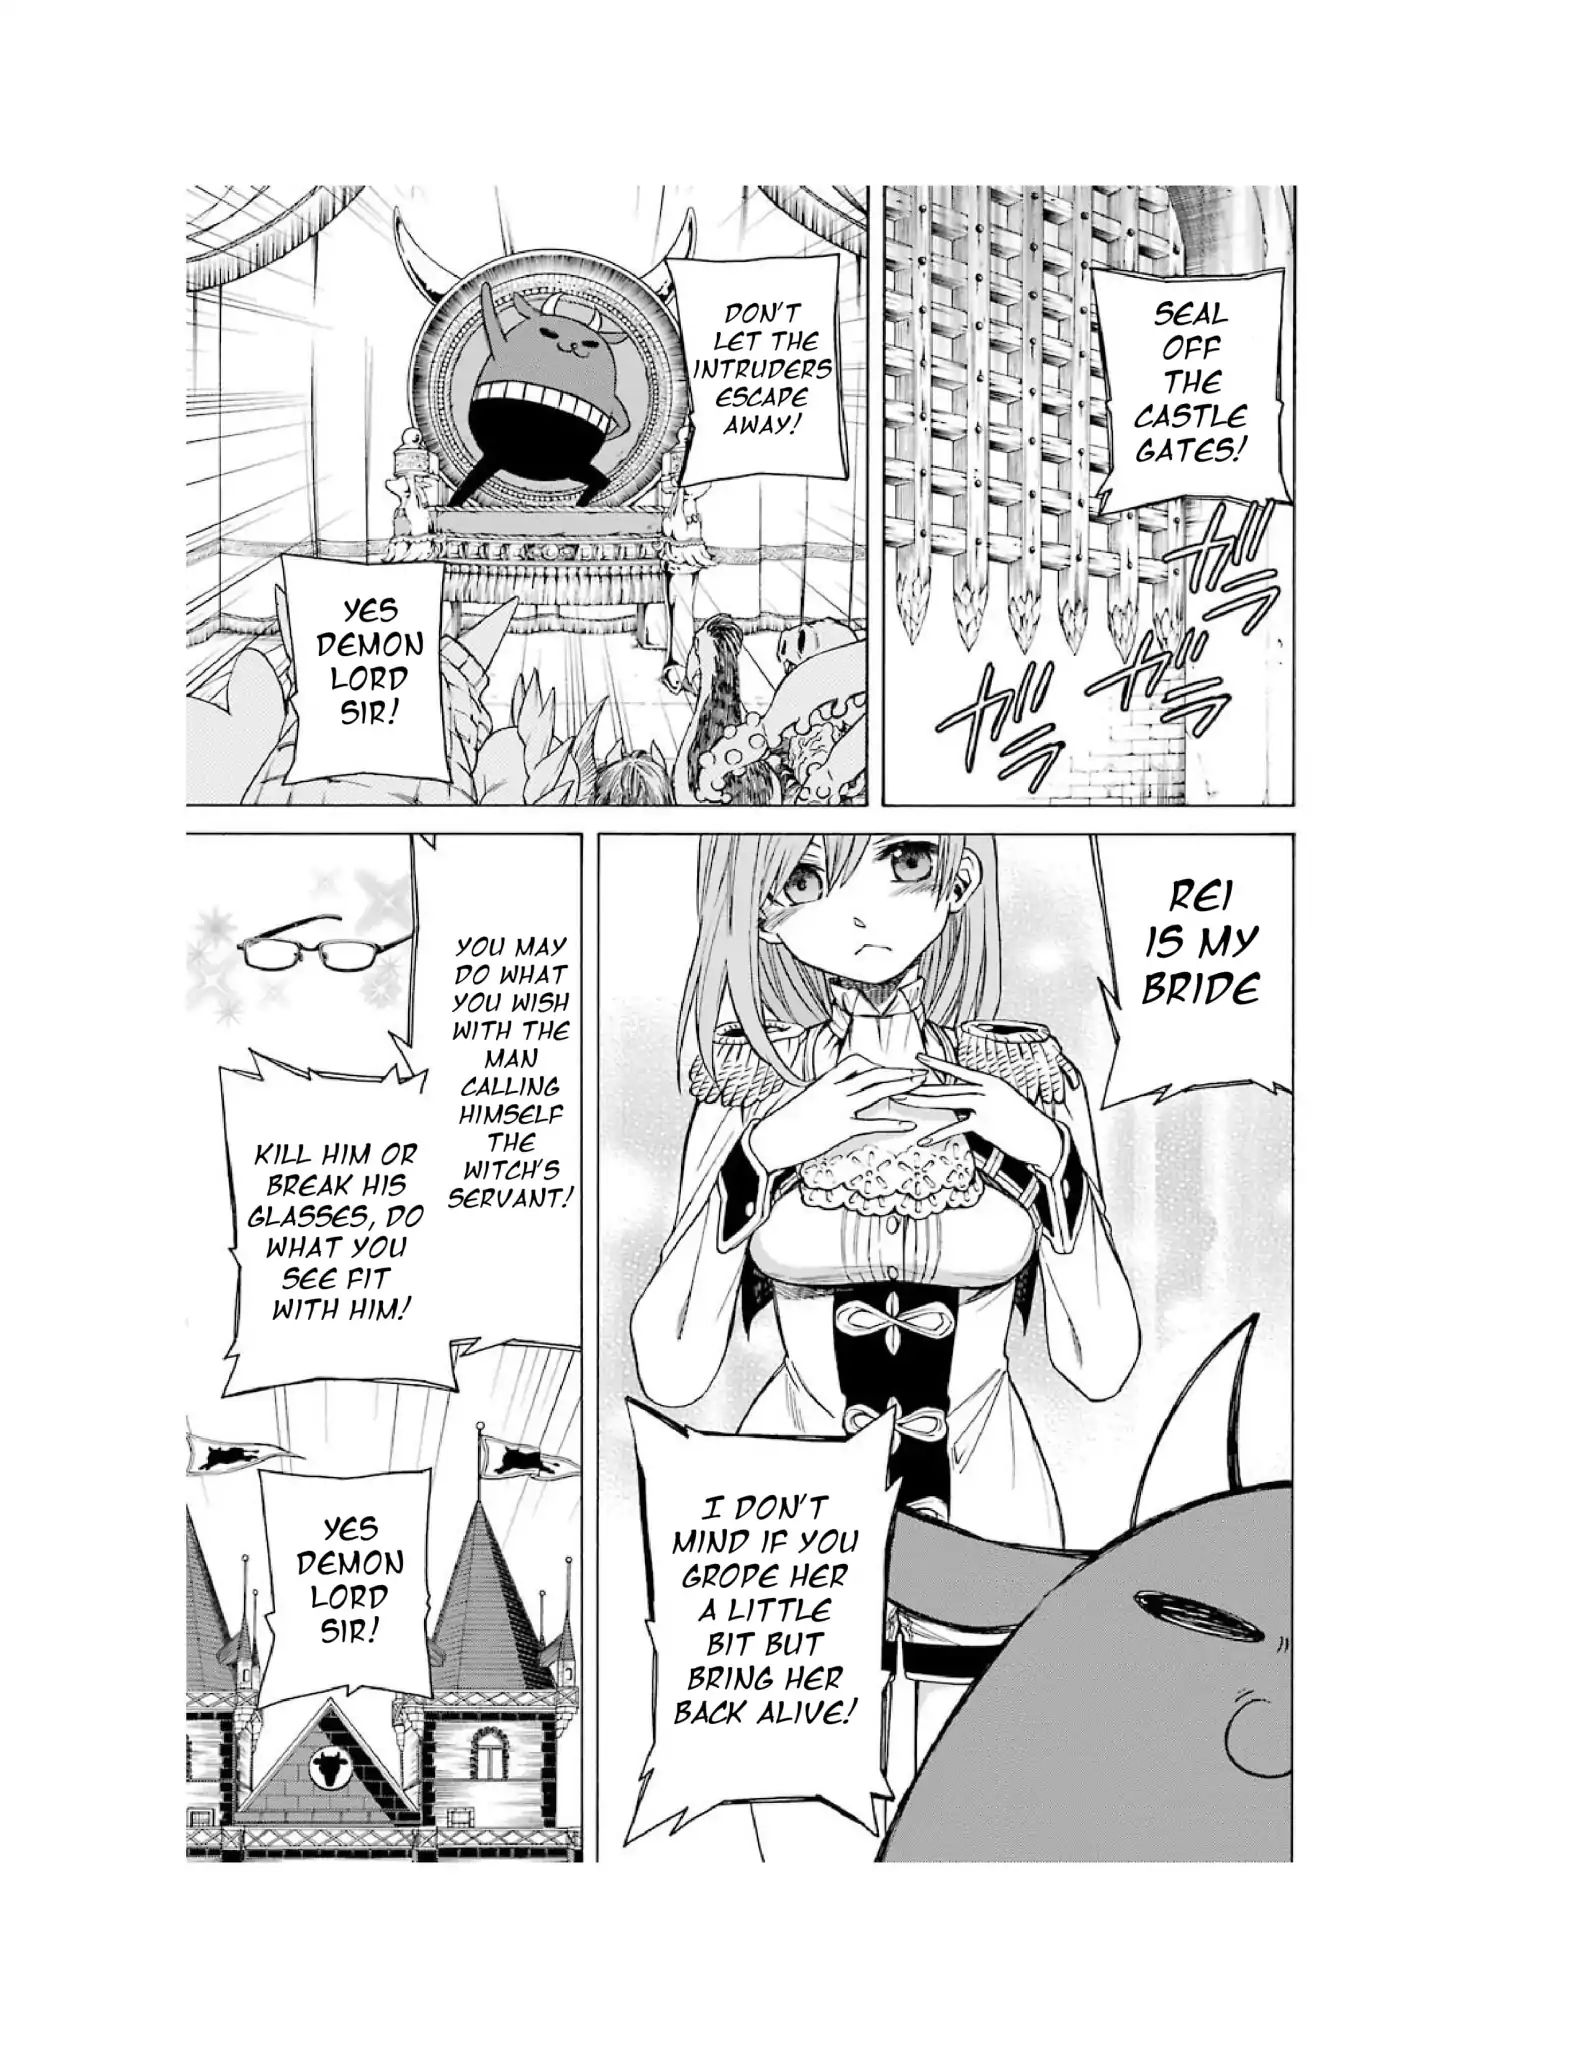 The Witch's Servant And The Demon Lords Horns Vol.1 Chapter 2: The Witches Servant And The Strongest Subordinate - Picture 3